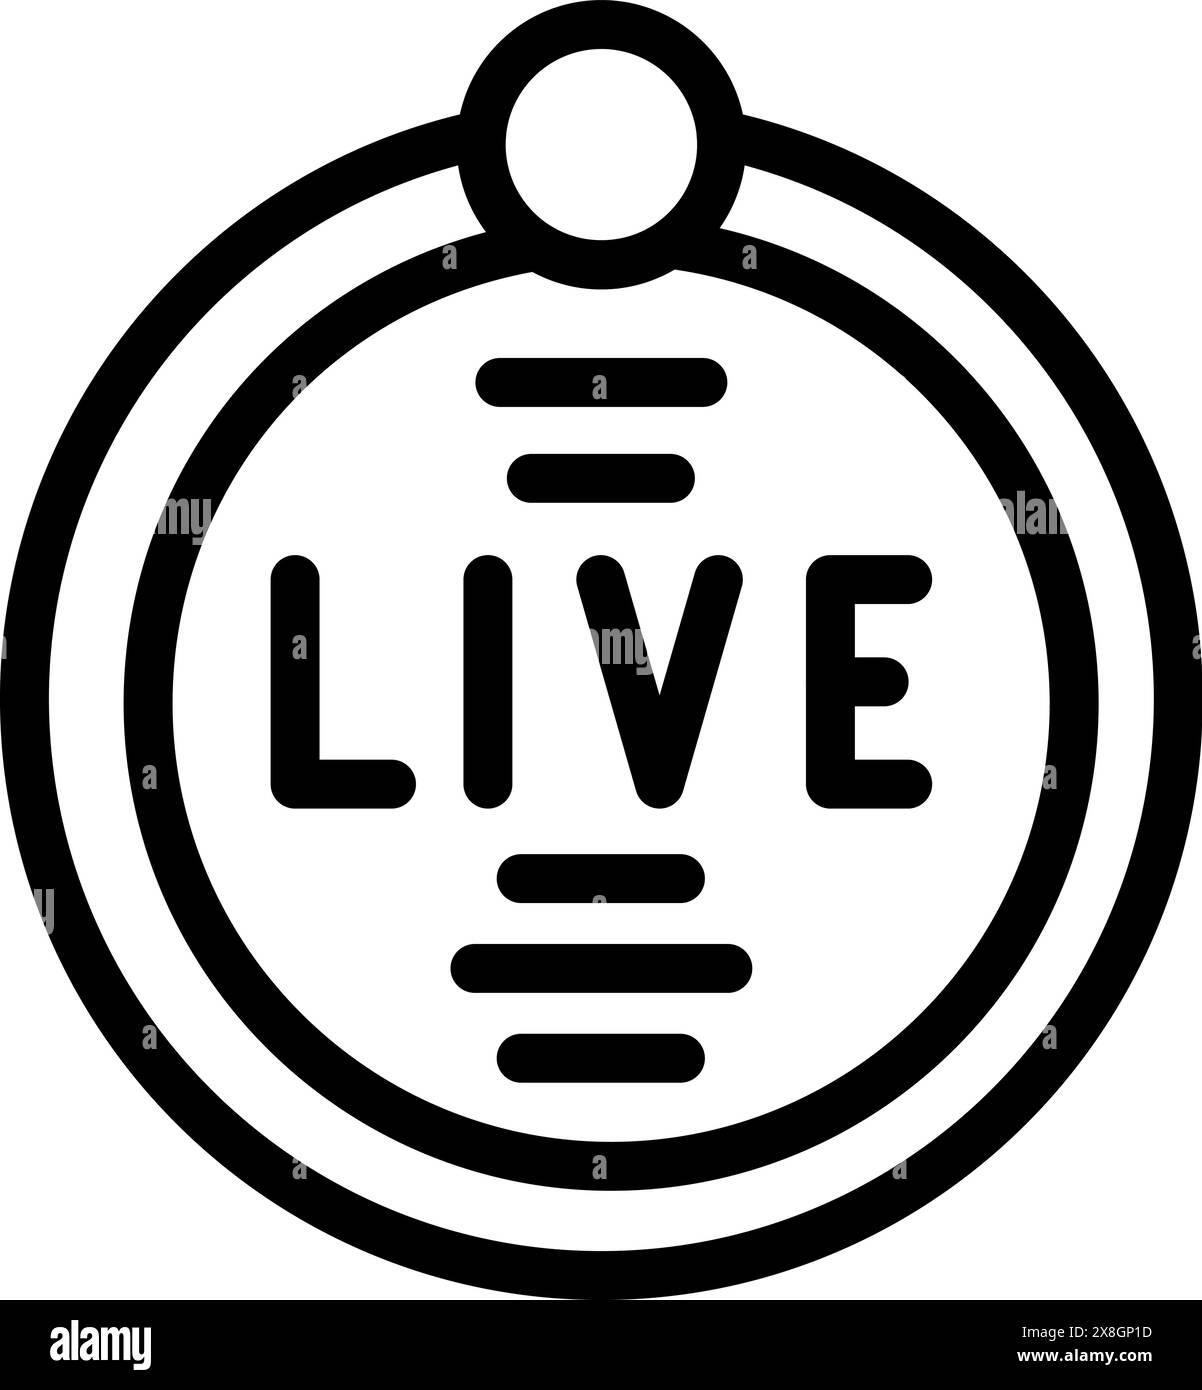 Live streaming badge icon for modern, minimalistic web design and user interface, featuring a black and white vector symbol for realtime interactive media distribution and engagement Stock Vector